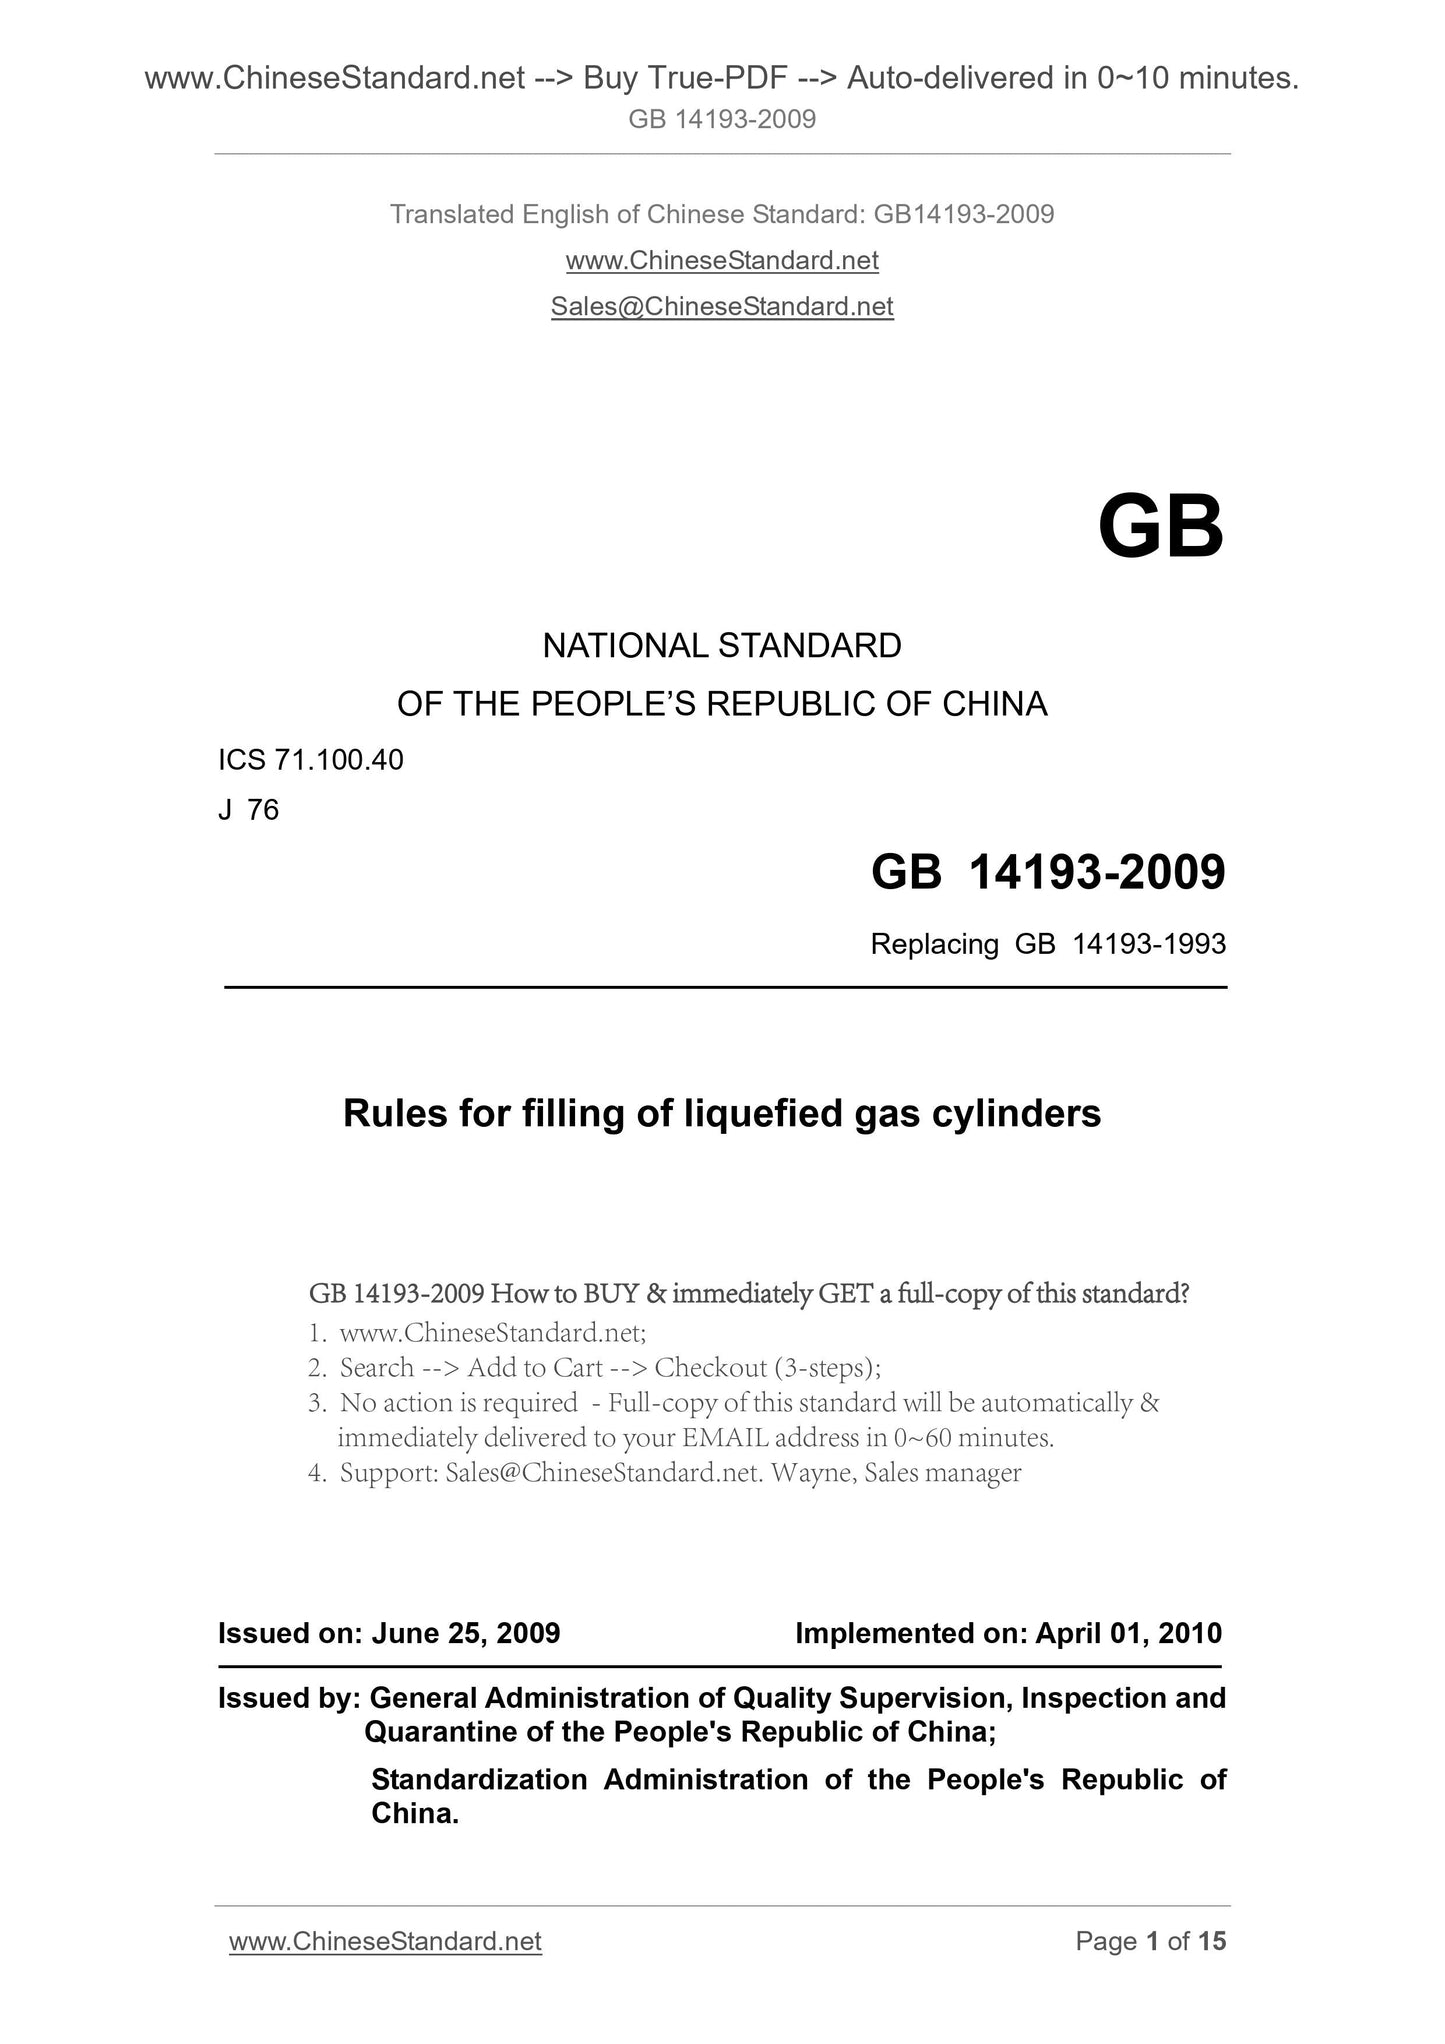 GB 14193-2009 Page 1